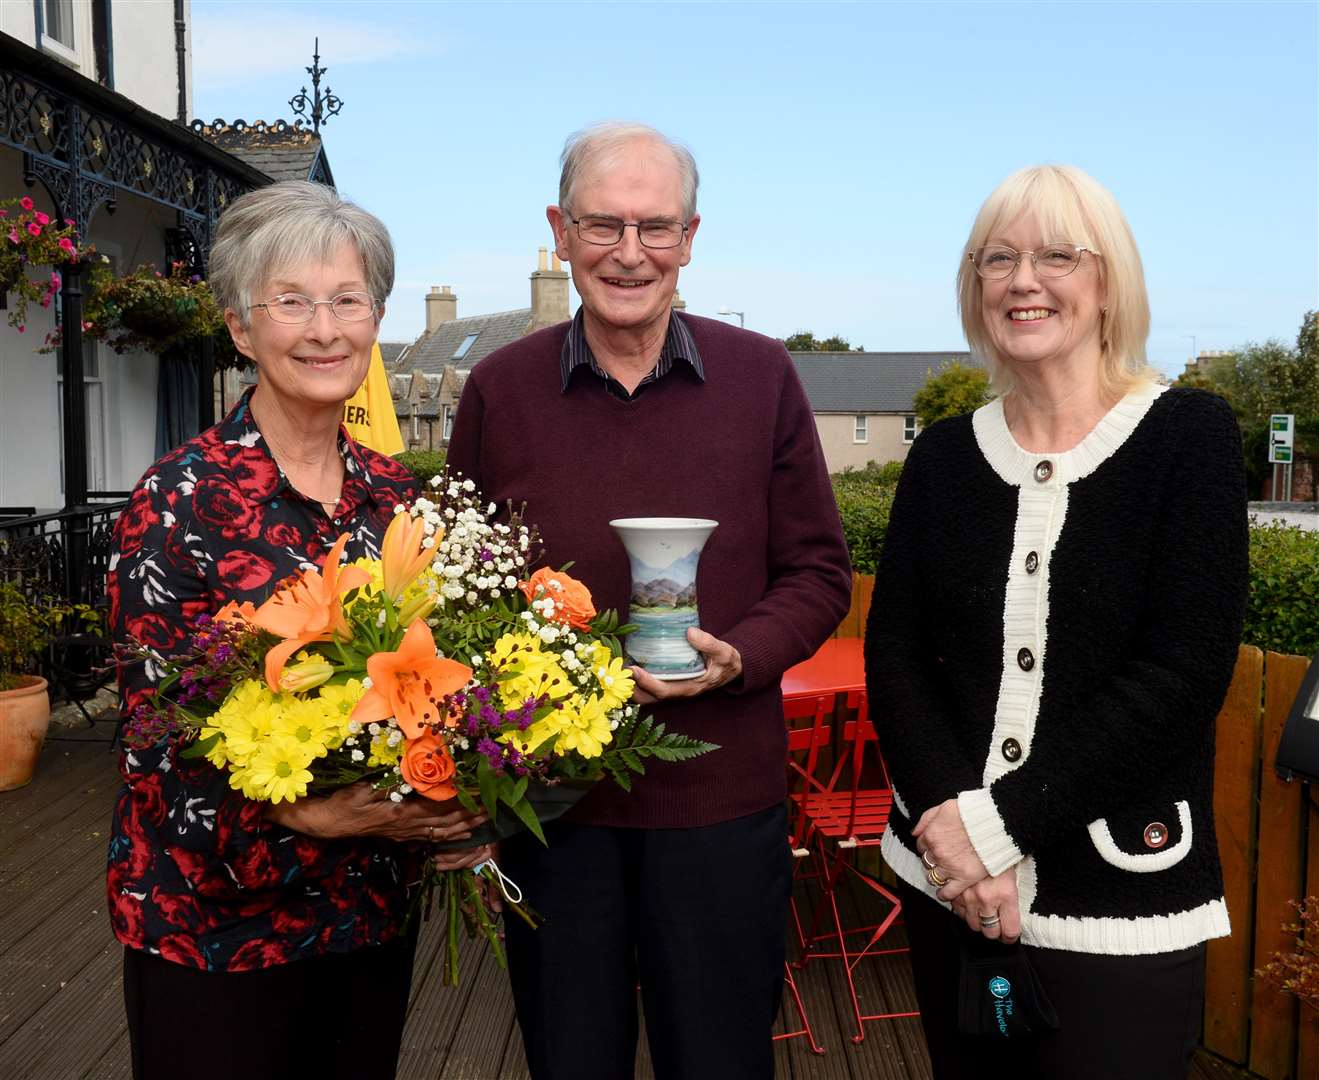 Iain and Jane Fairweather are presented flowers and Scottish stoneware by VisitNairn vice-chairman Morag Holding.